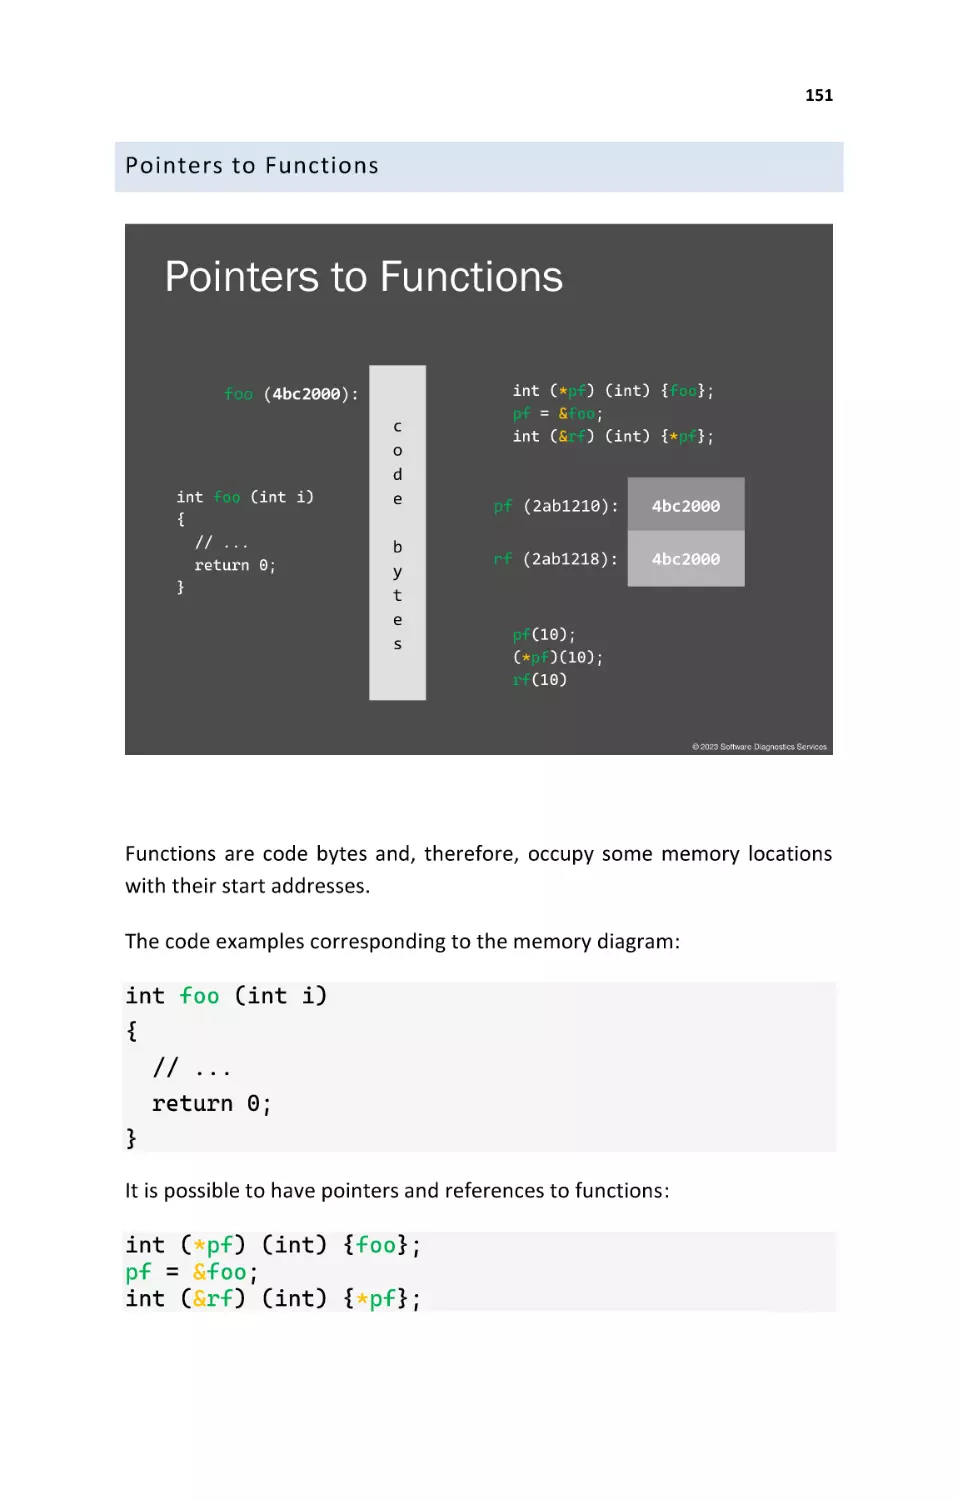 Pointers to Functions